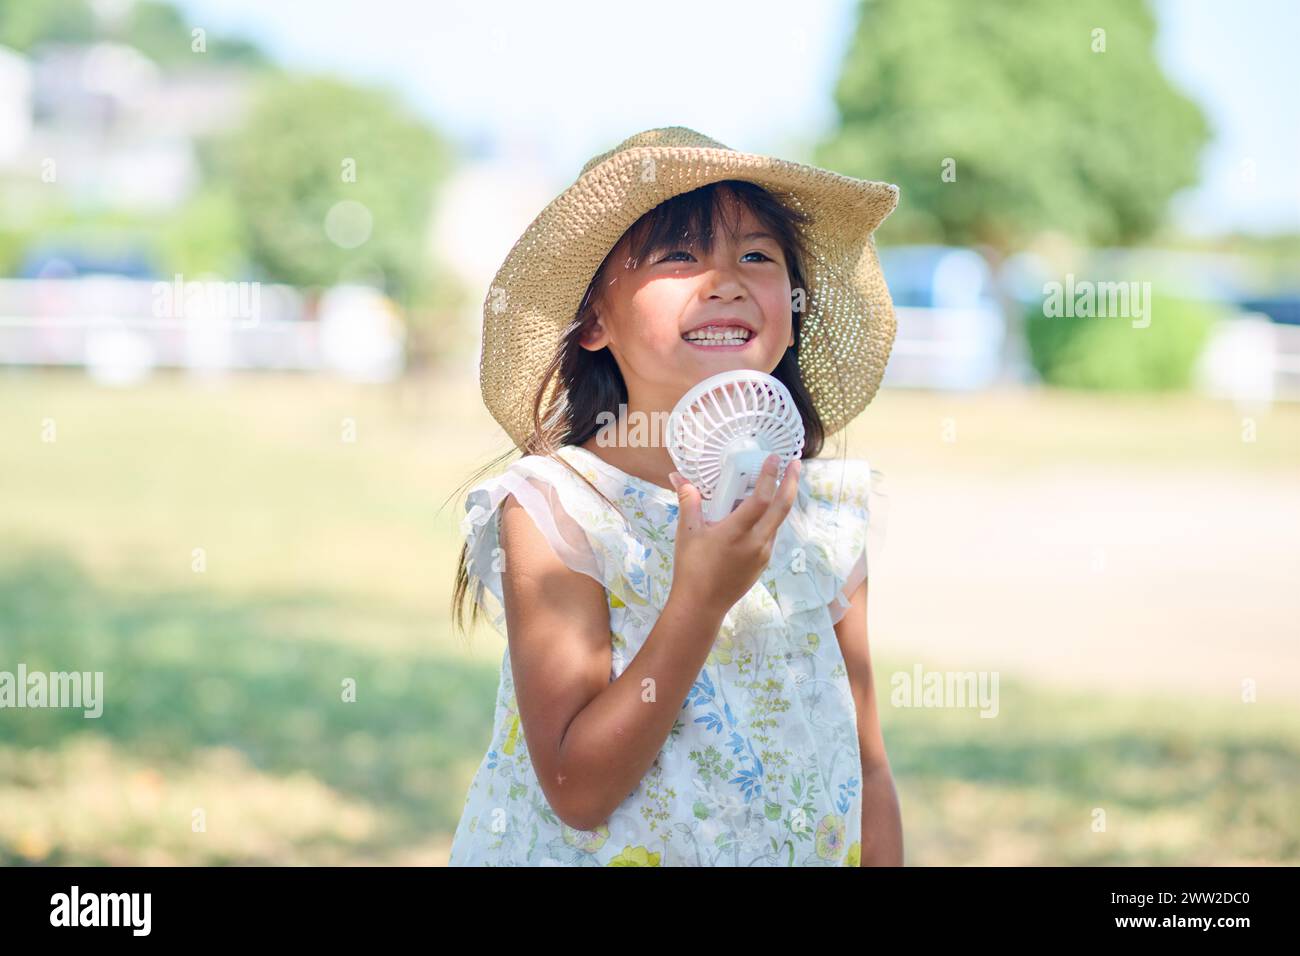 A young girl in a hat holding a white fan Stock Photo